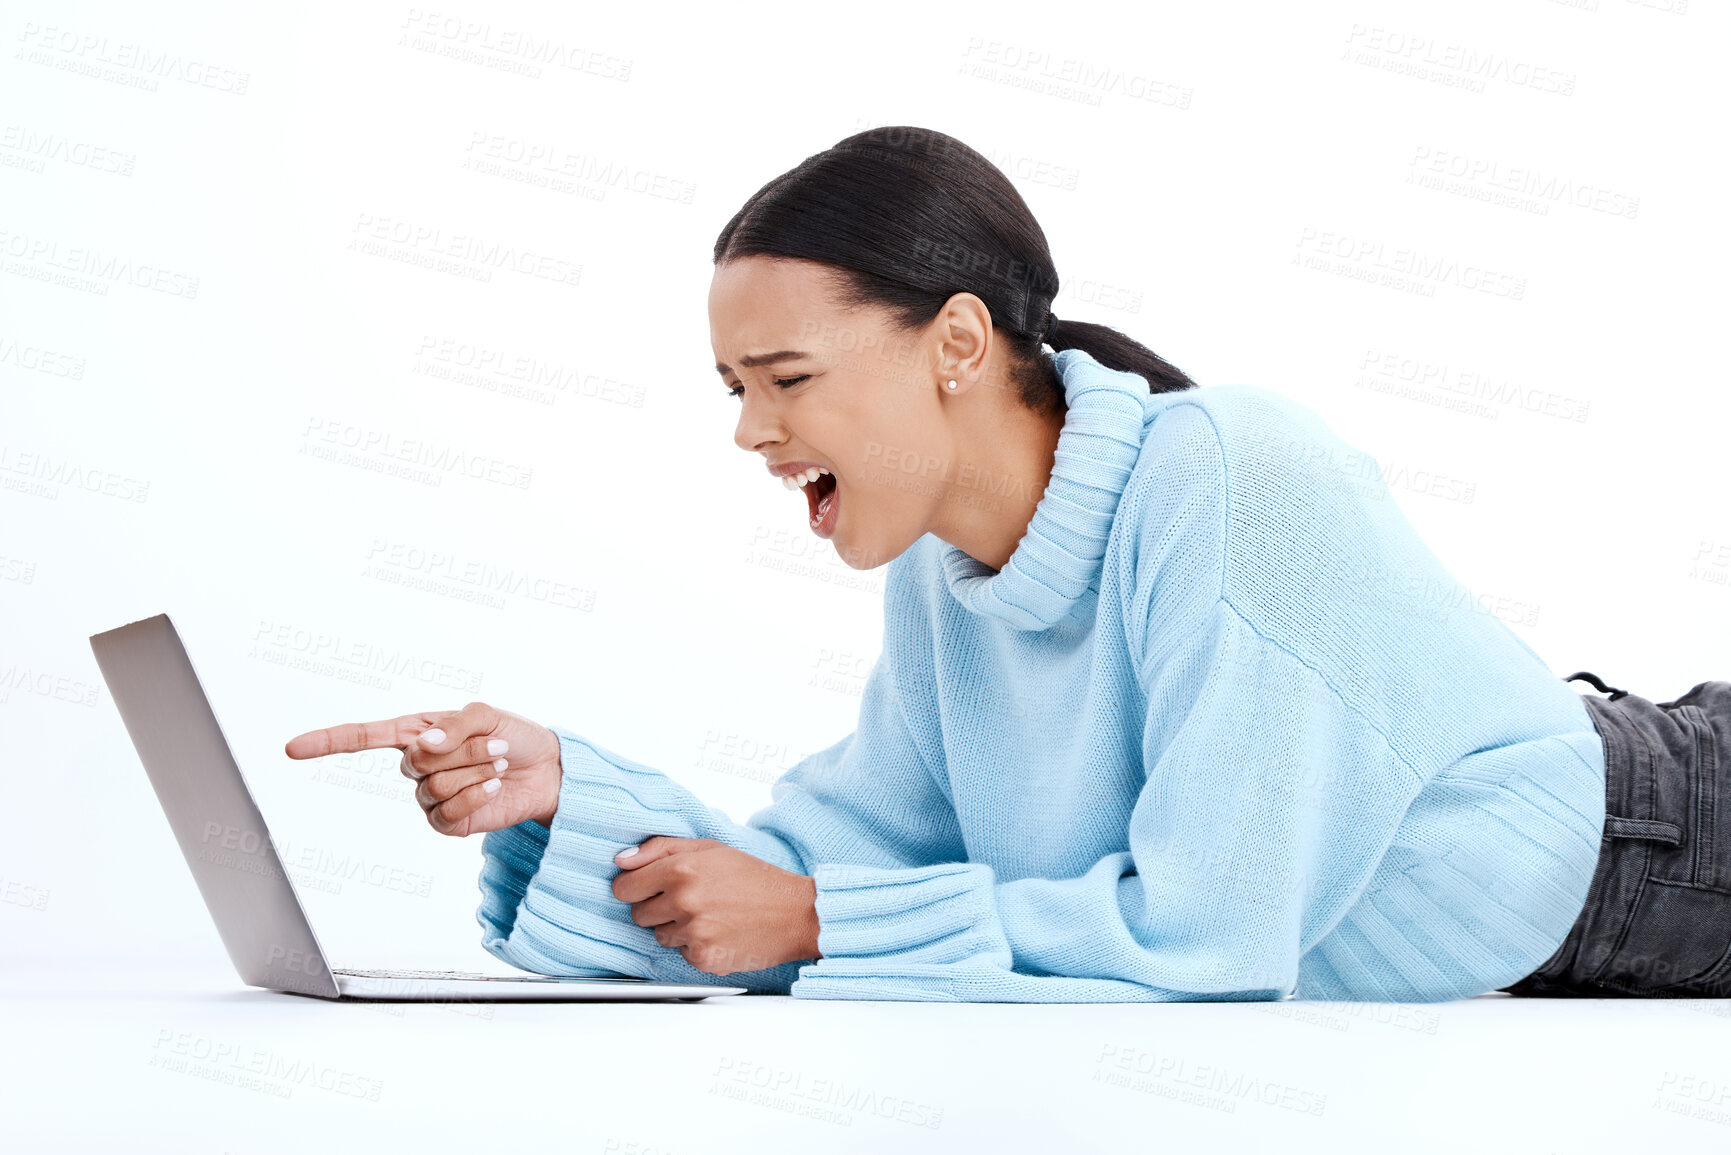 Buy stock photo Laptop, angry woman and studio feeling frustrated, upset and stress from email scam. Isolated, white background and female with computer spam and 404 tech problem from phishing on the ground